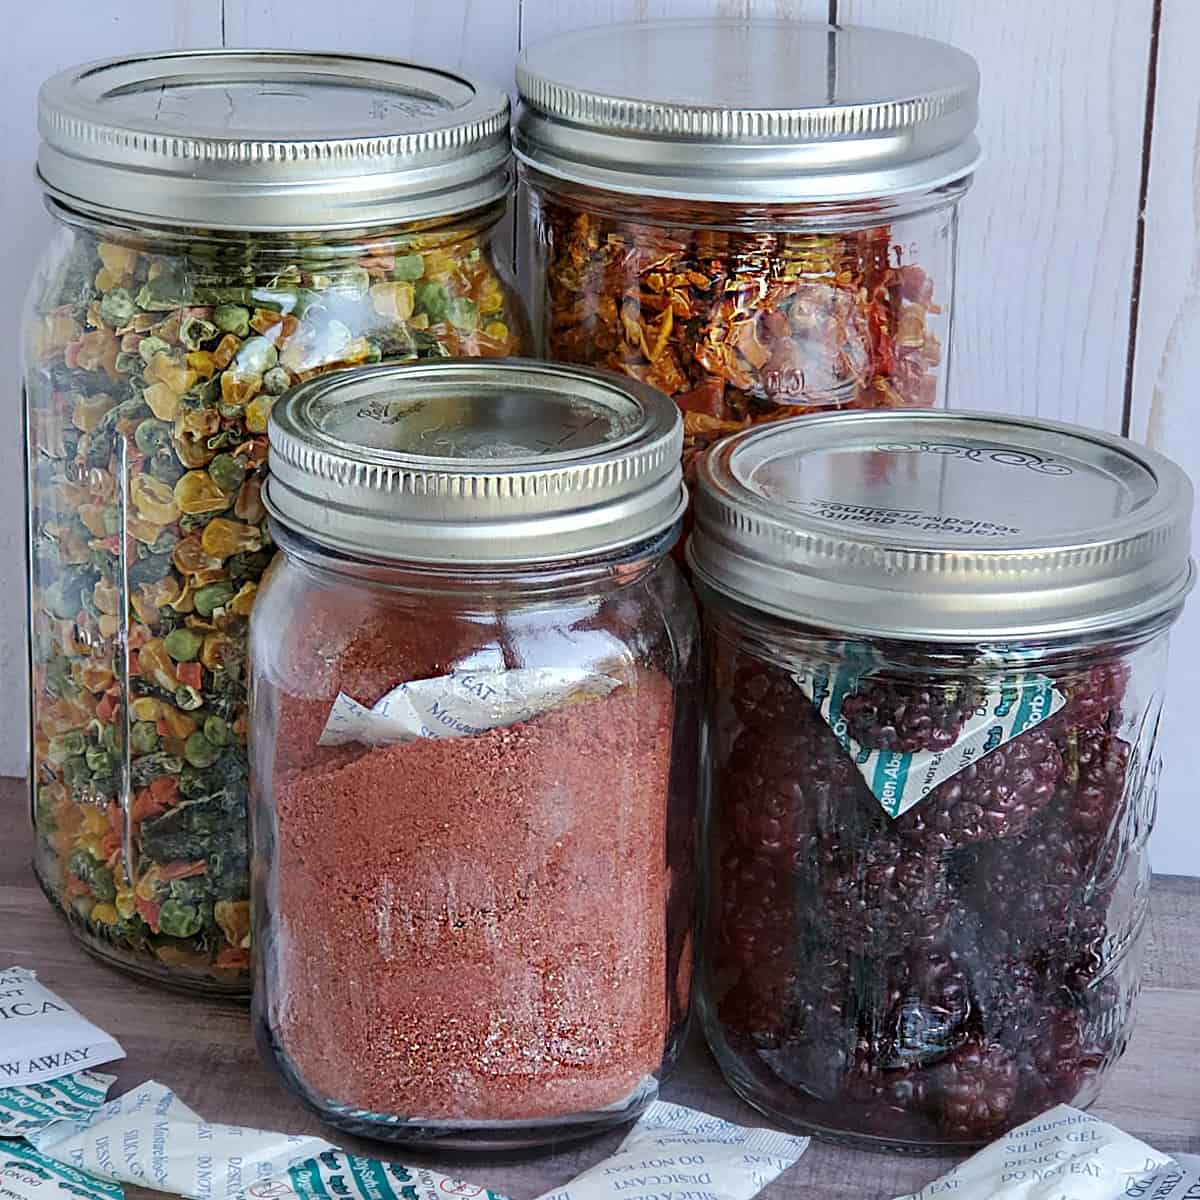 How to Store Dehydrated Foods - The Purposeful Pantry